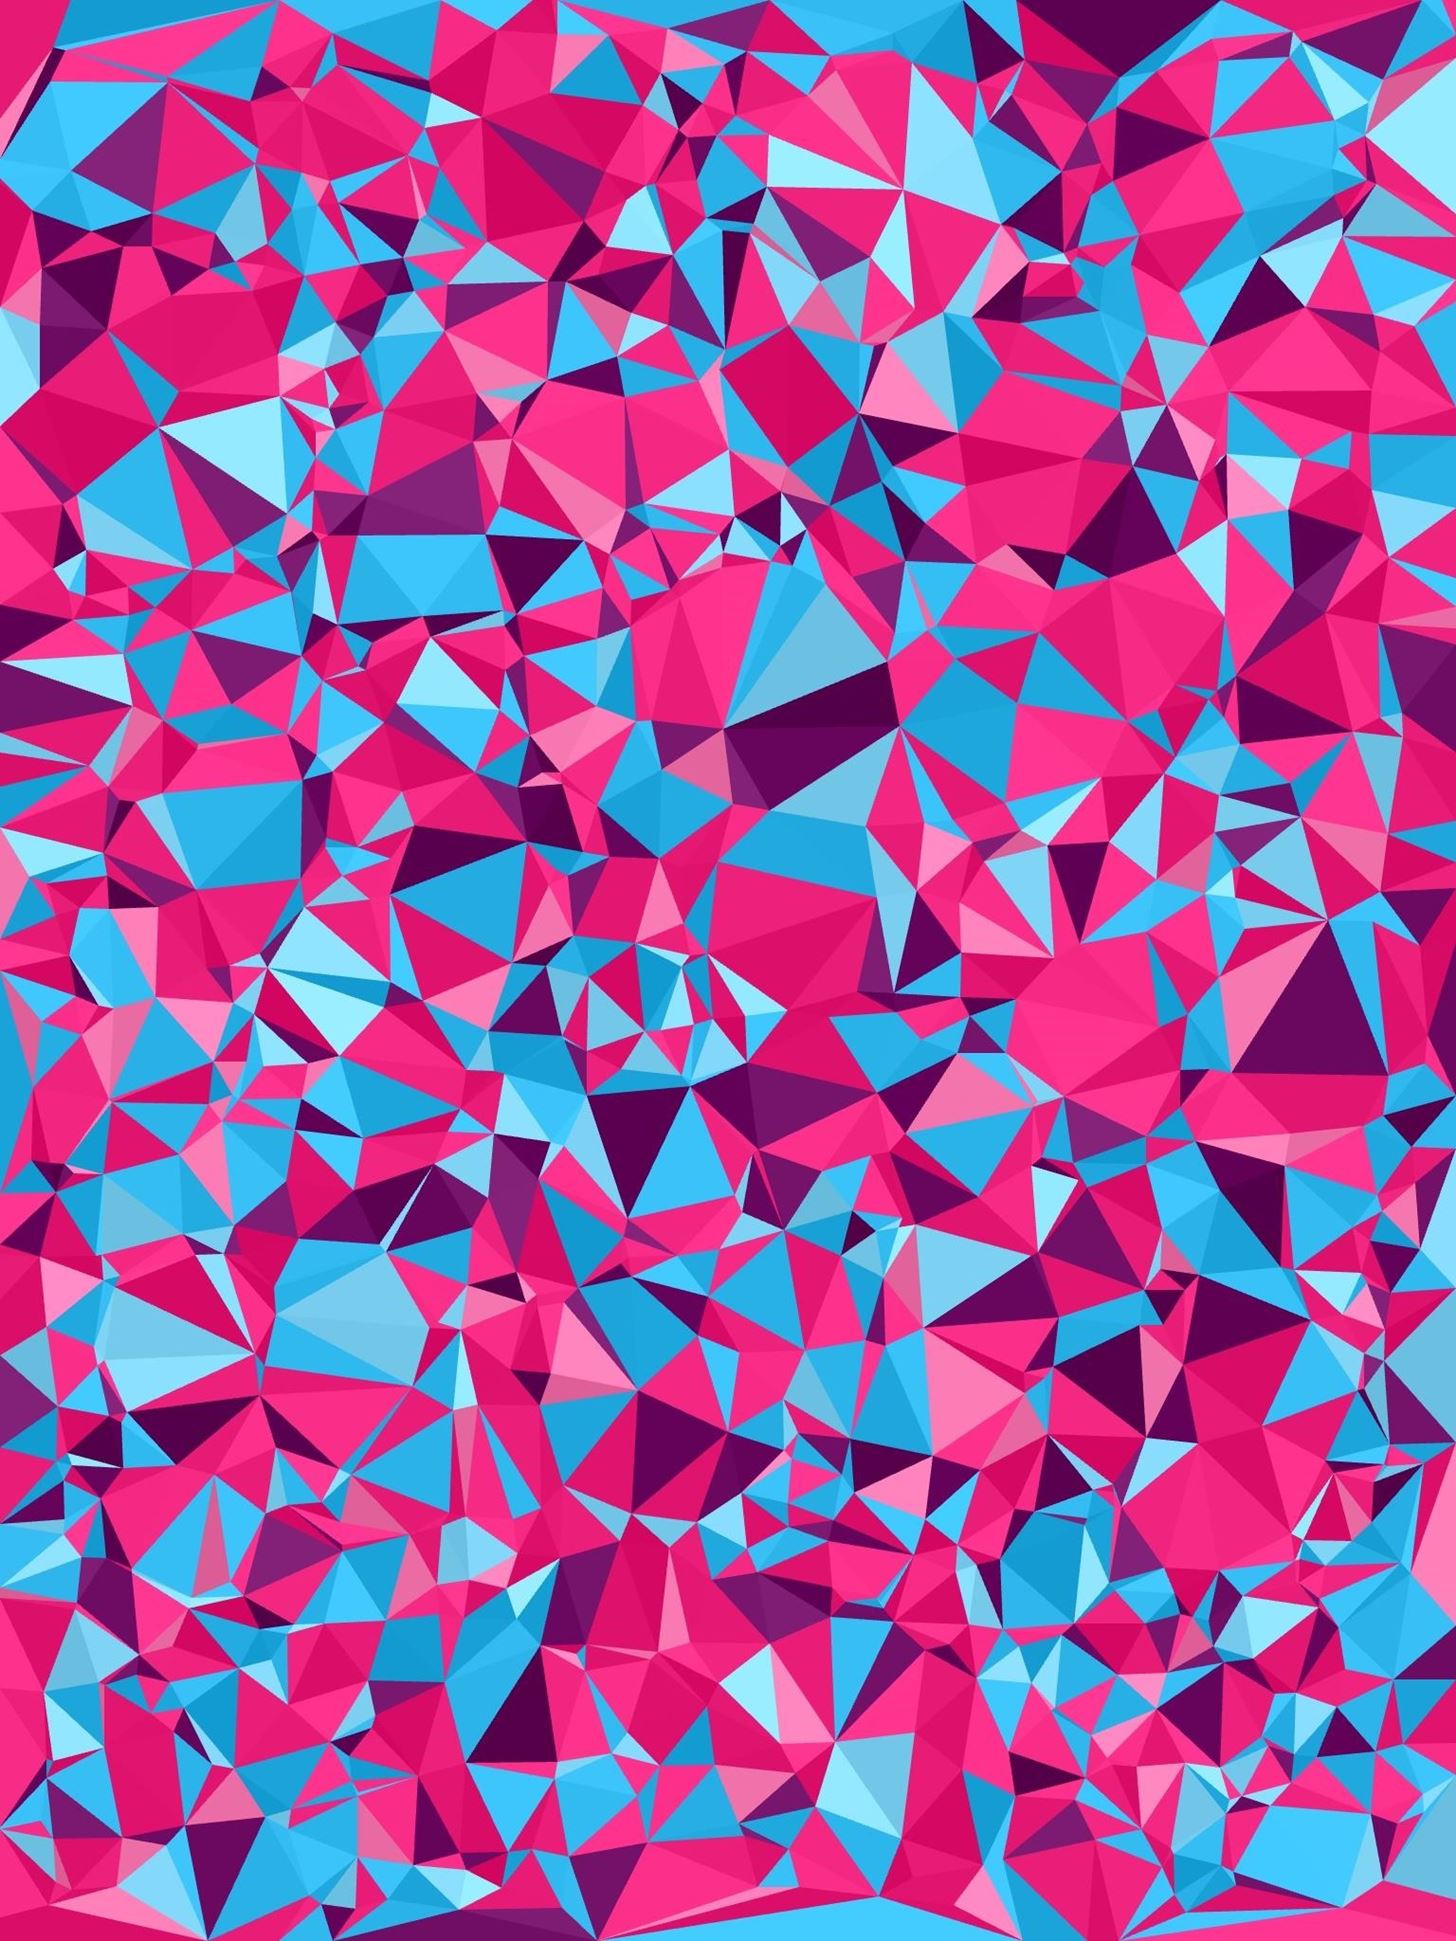 How to Create Your Own Abstract, Polygon-Shaped Wallpapers for Your iPad or iPhone